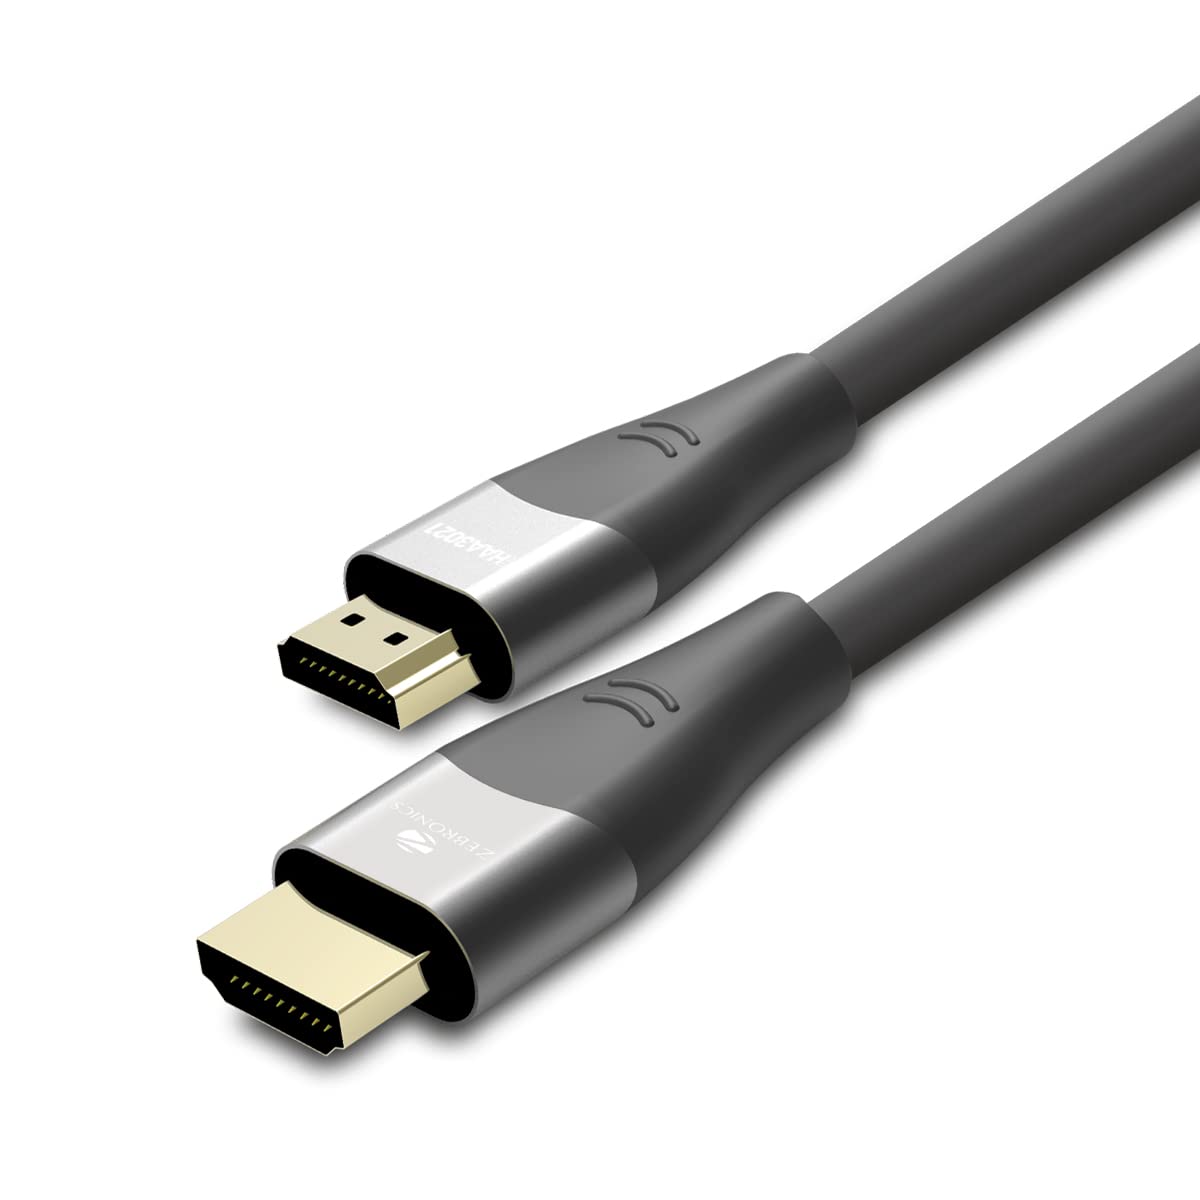 ZEBRONICS HAA3021 HDMI Version 2.1 Cable with 8K @ 60Hz, 4K @ 120Hz, eARC & CEC Support, 3D Compatible, 3 Meters Length, 48Gbps max and Gold Plated connectors